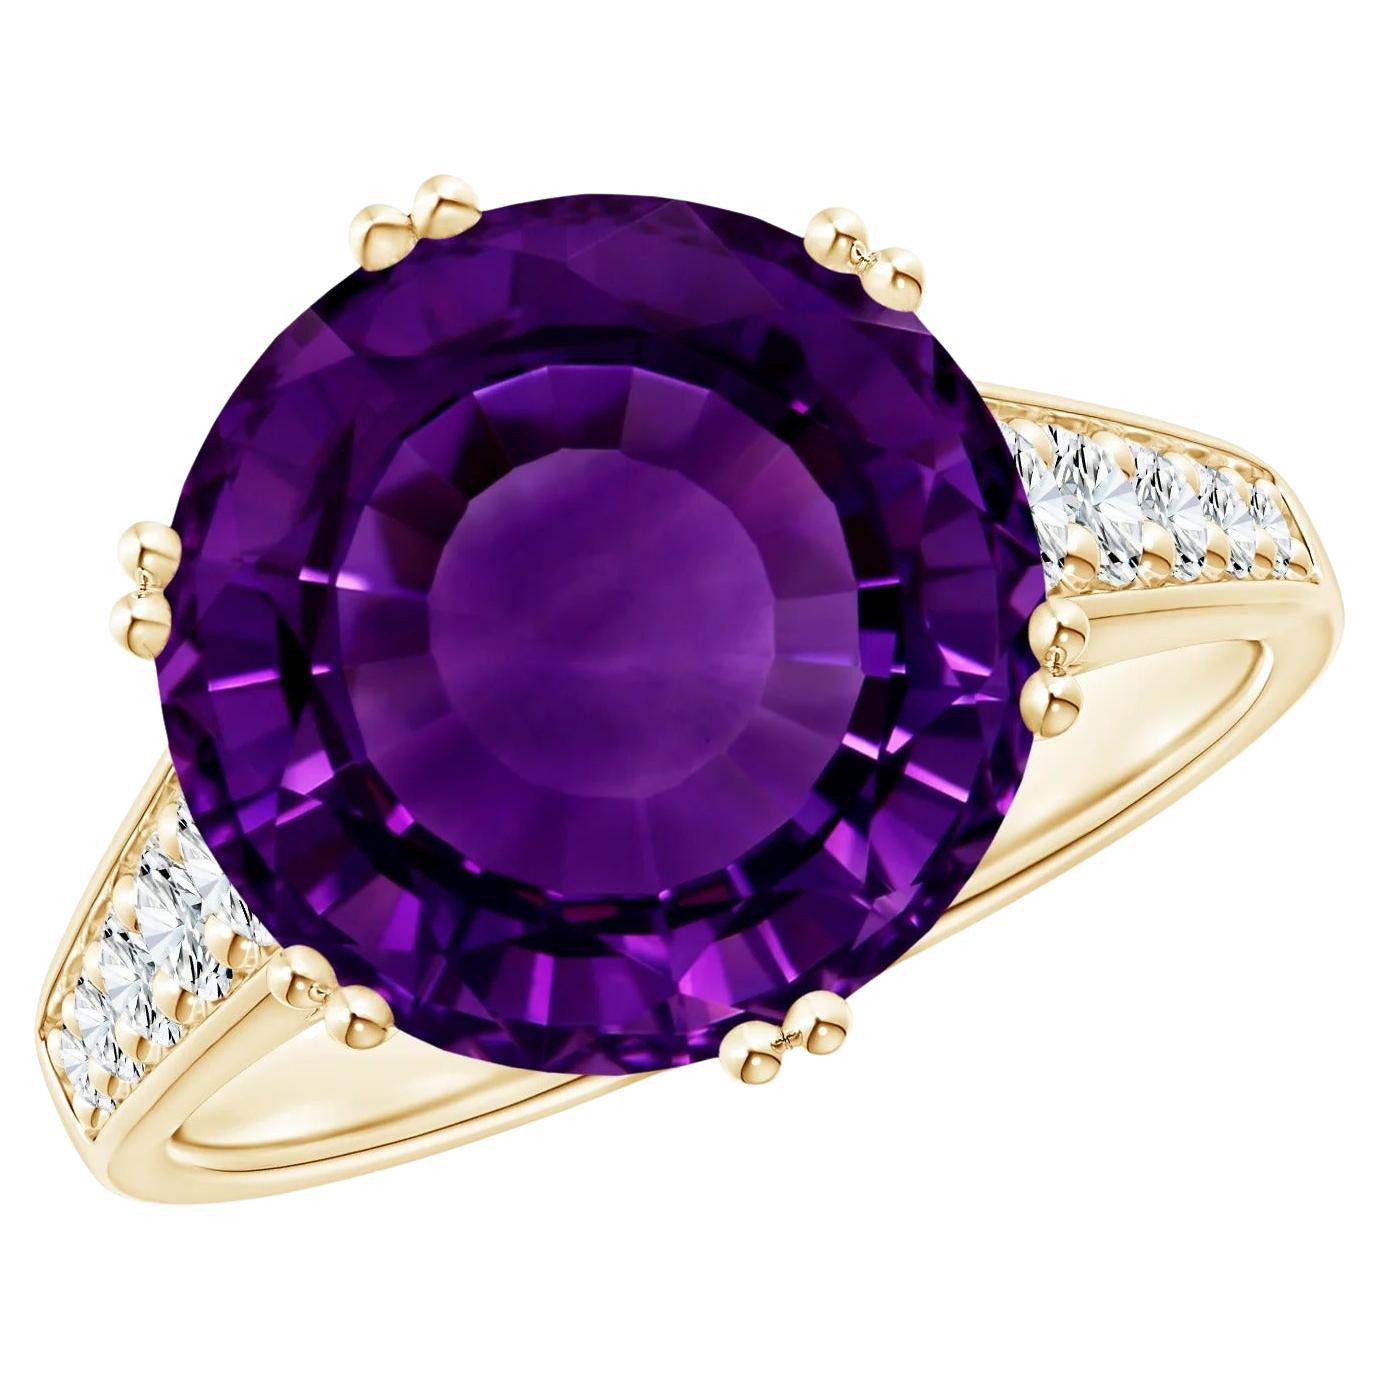 For Sale:  GIA Certified Natural Amethyst Cocktail Ring in Yellow Gold with Diamonds